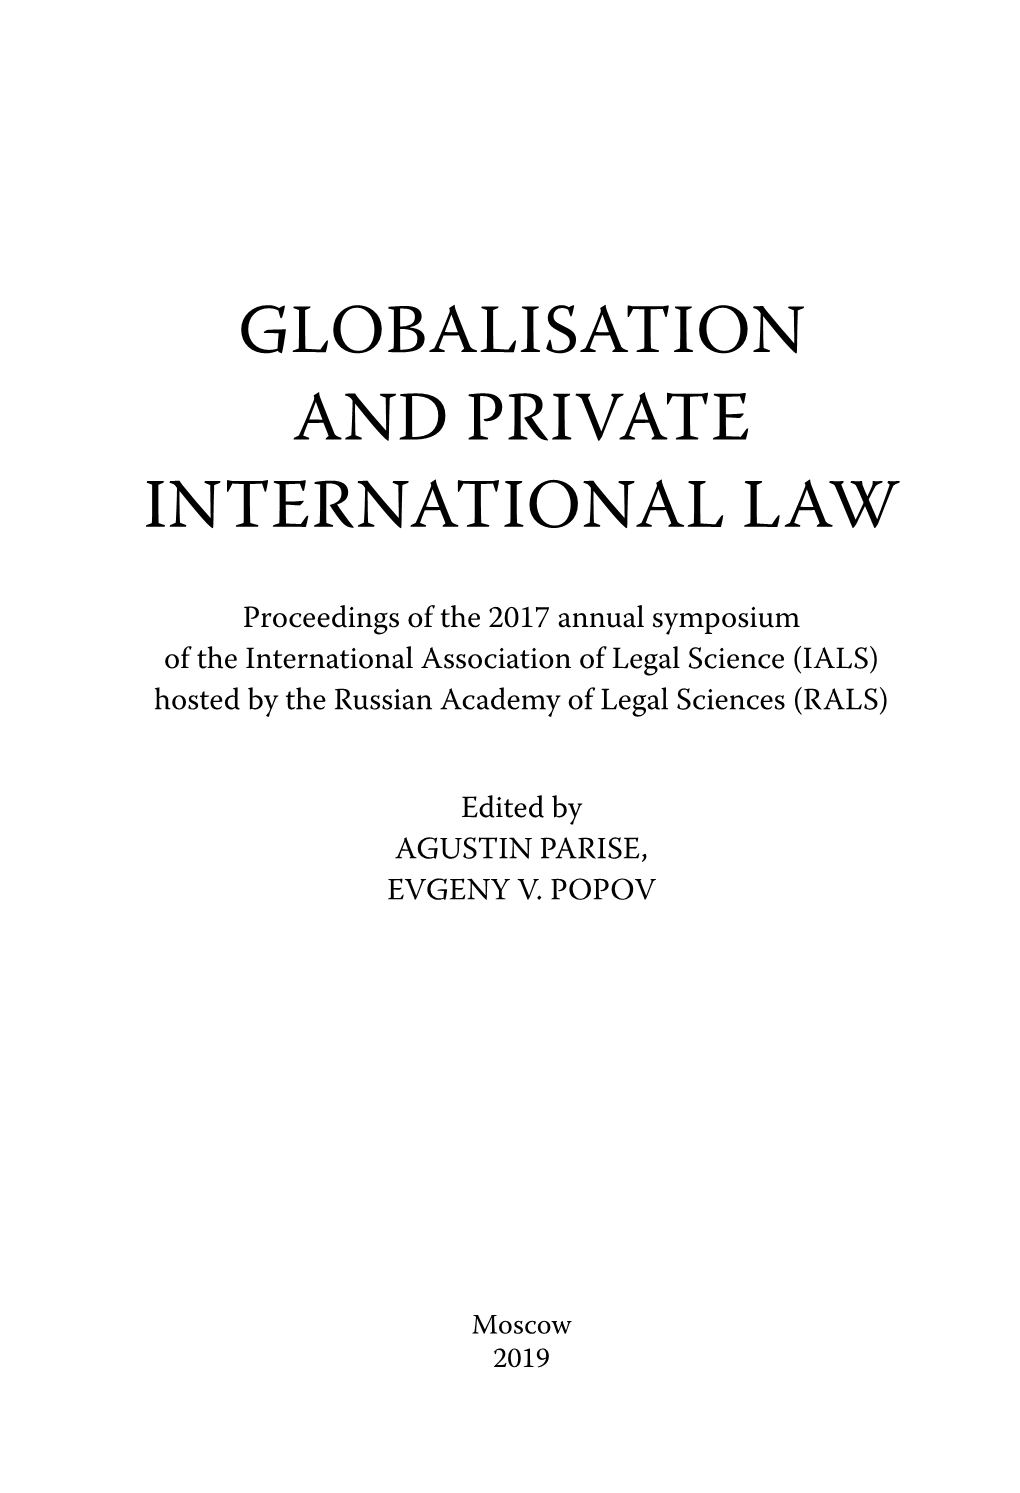 Globalisation and Private New 18-06-2019.Indd